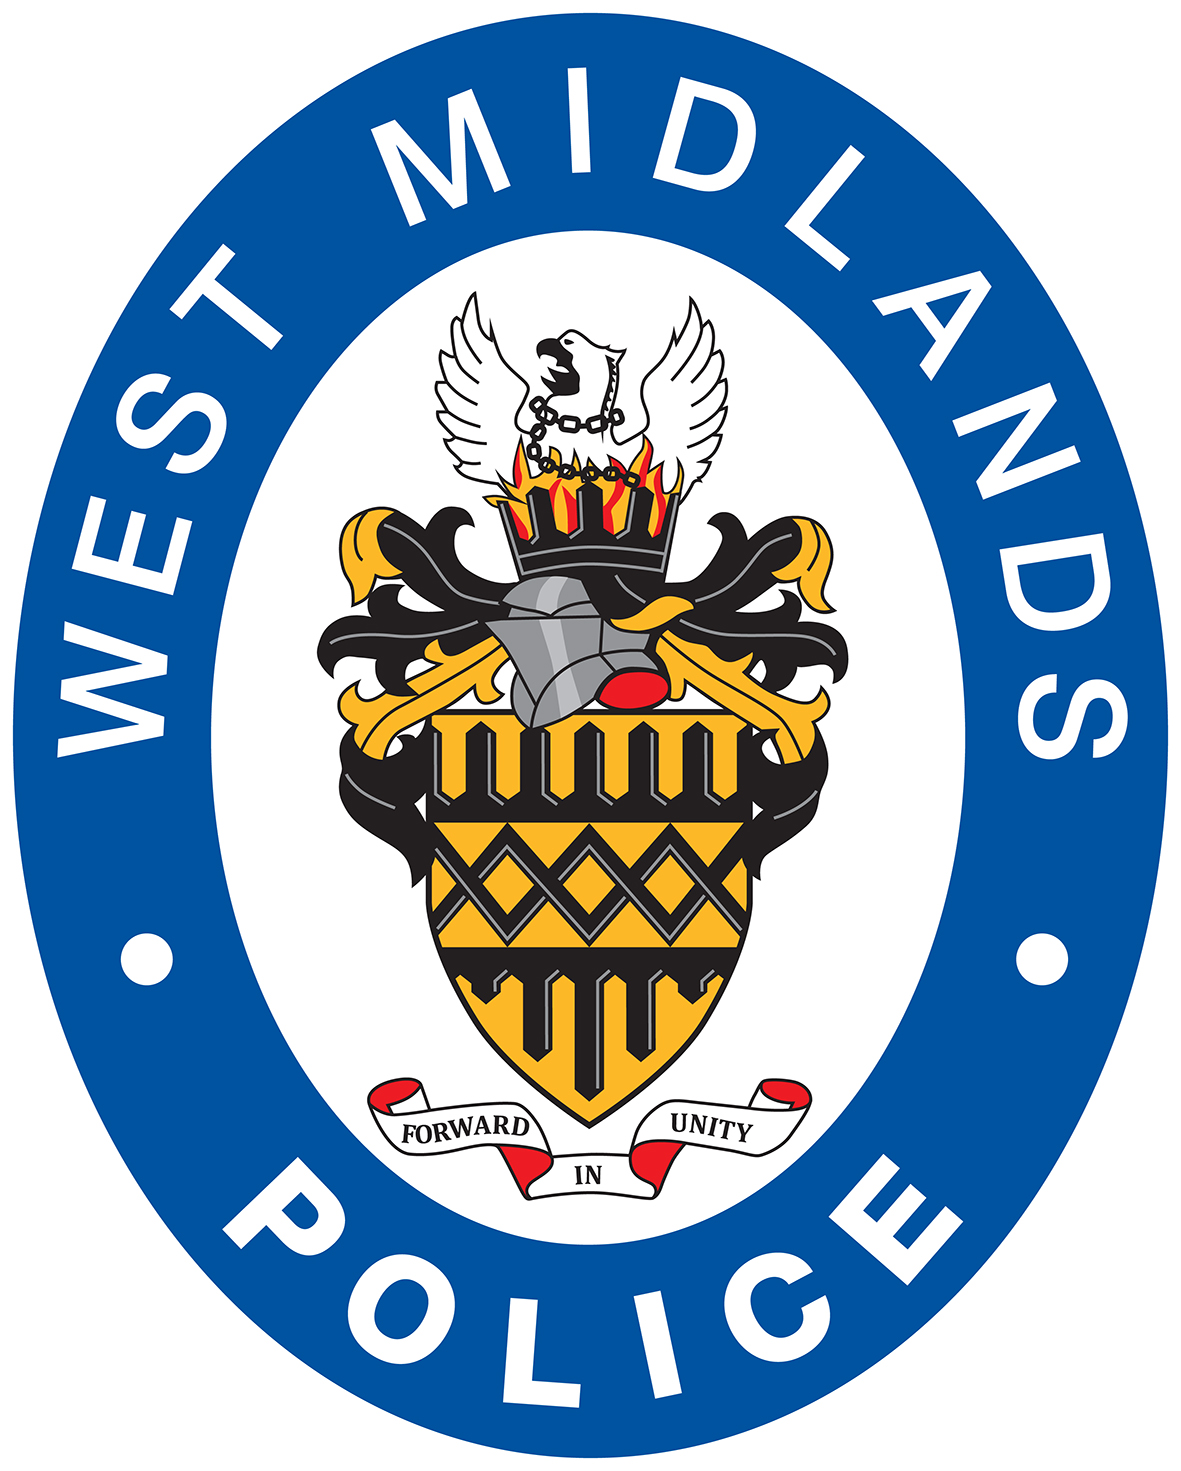 West Midlands Police - Dudley Local Policing Area